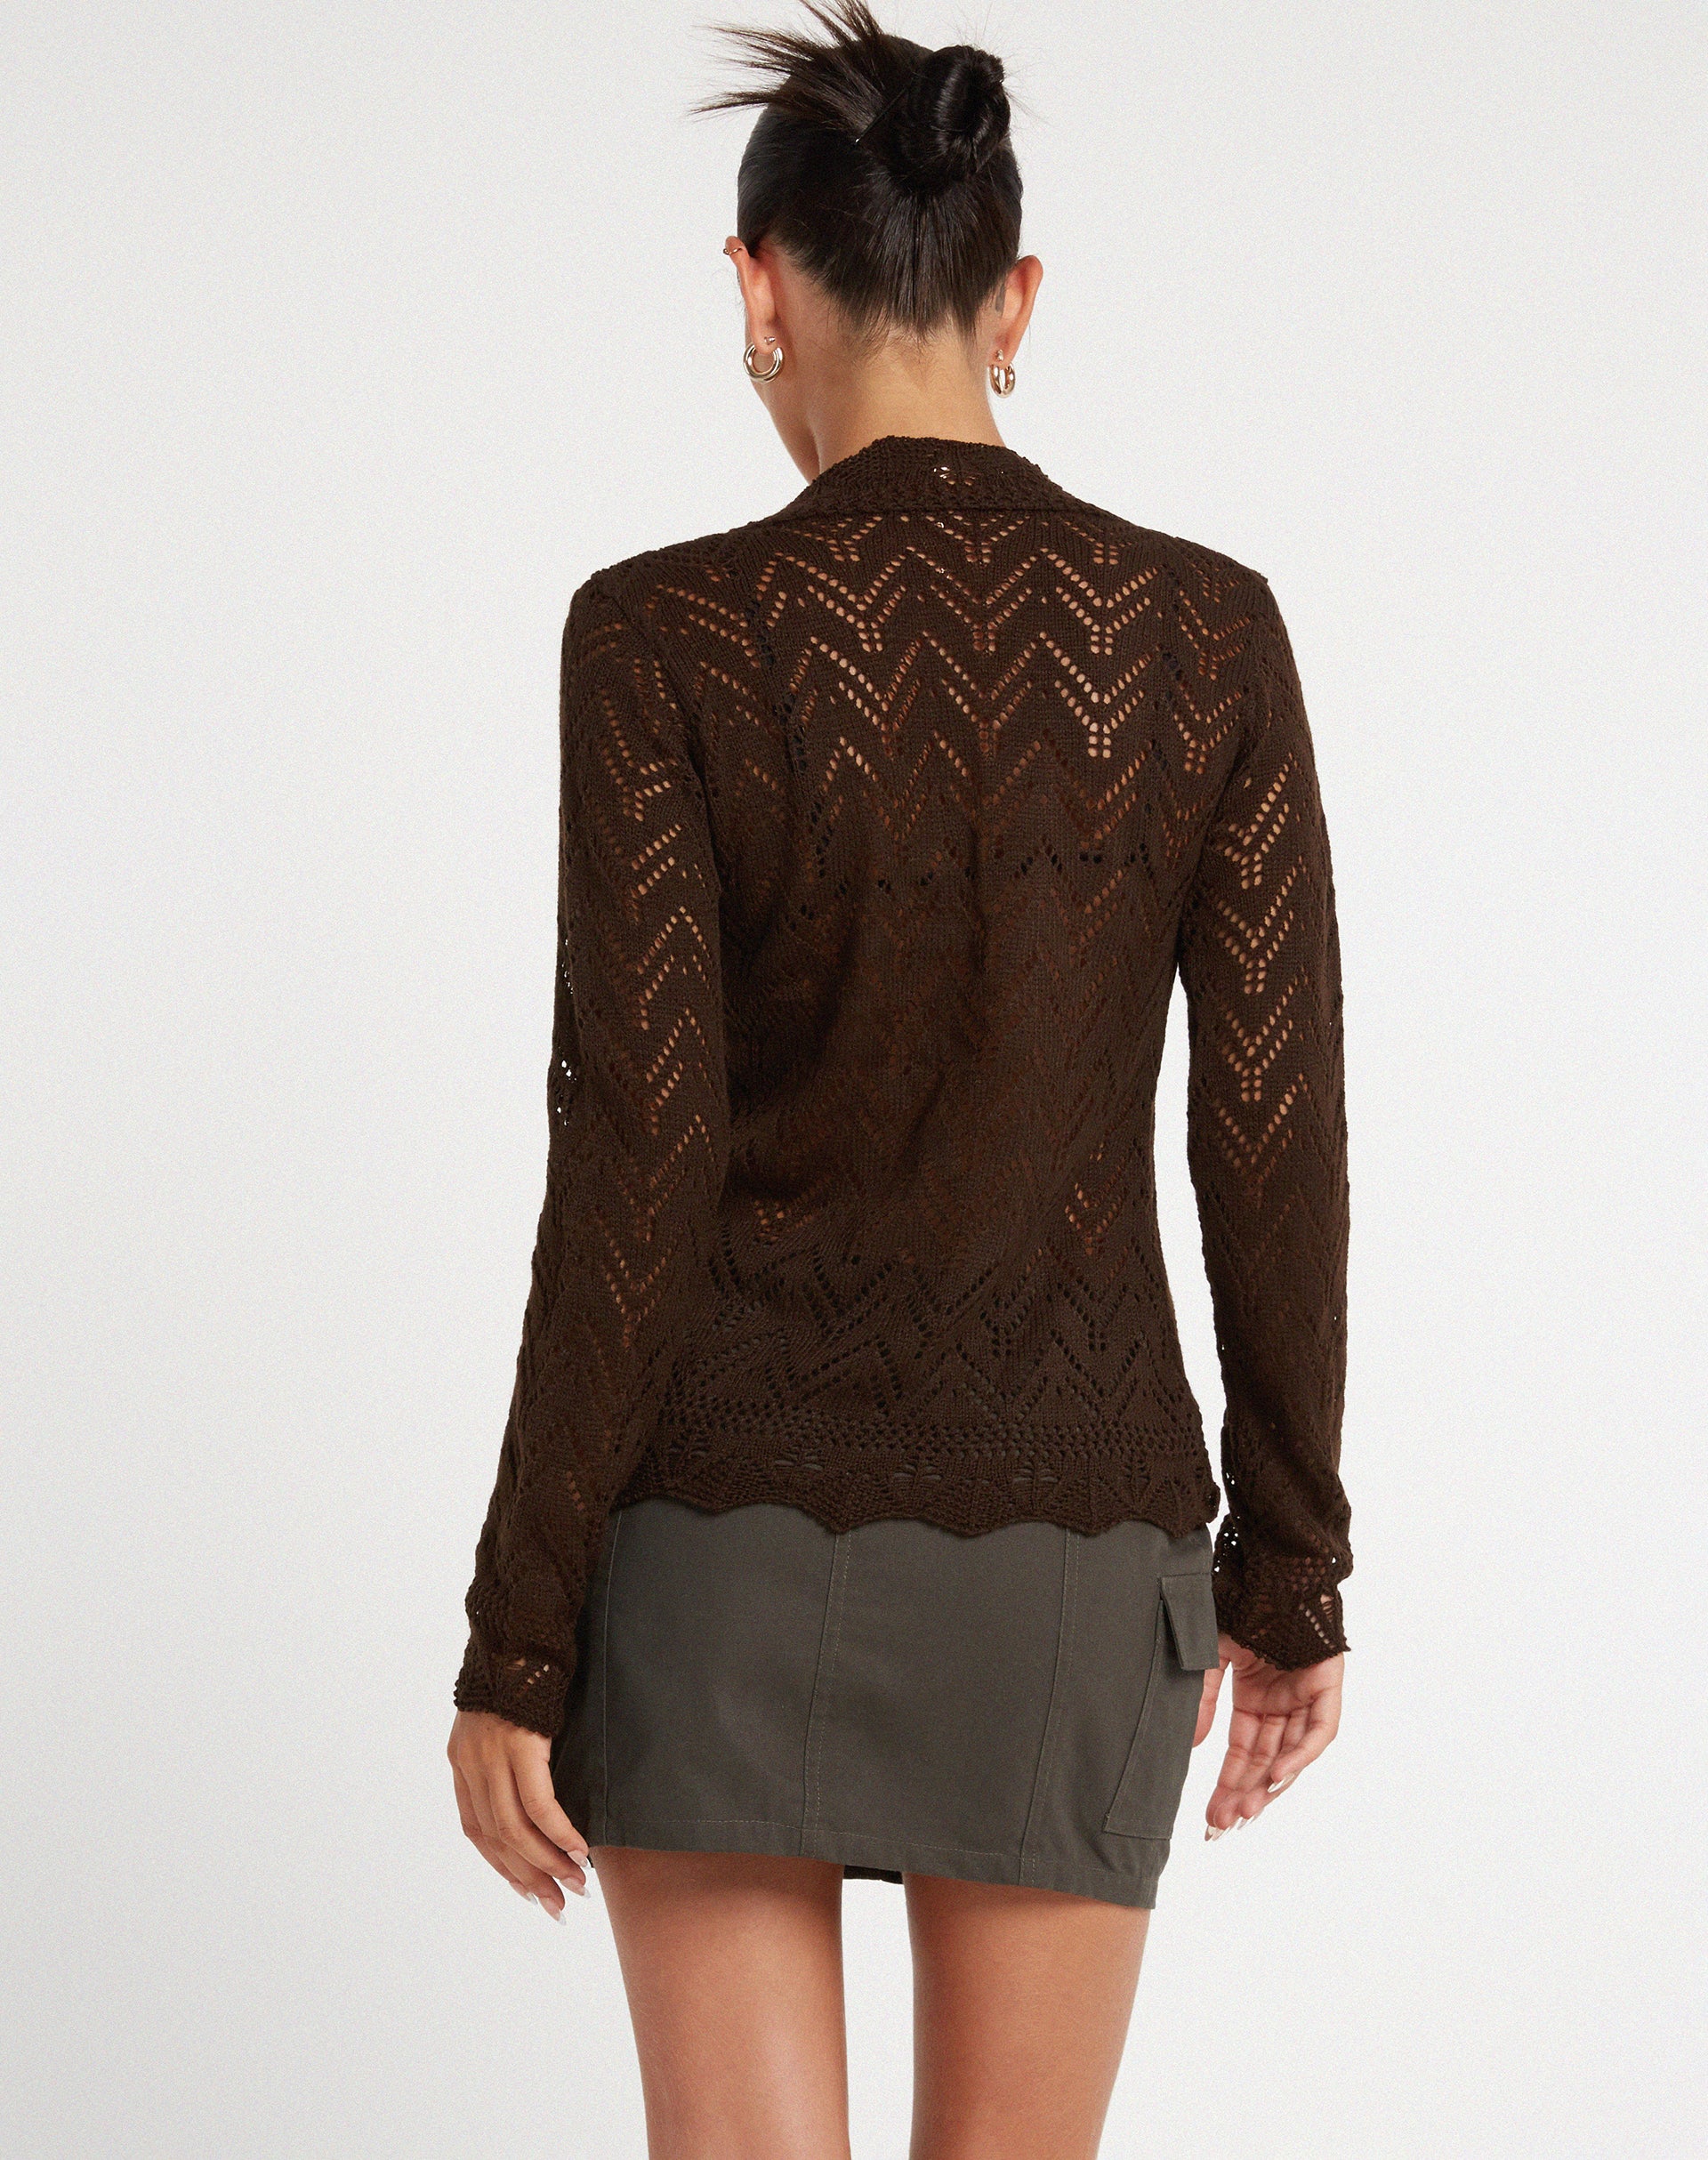 image of Mahina Cardi in Knitted Chocolate Brown